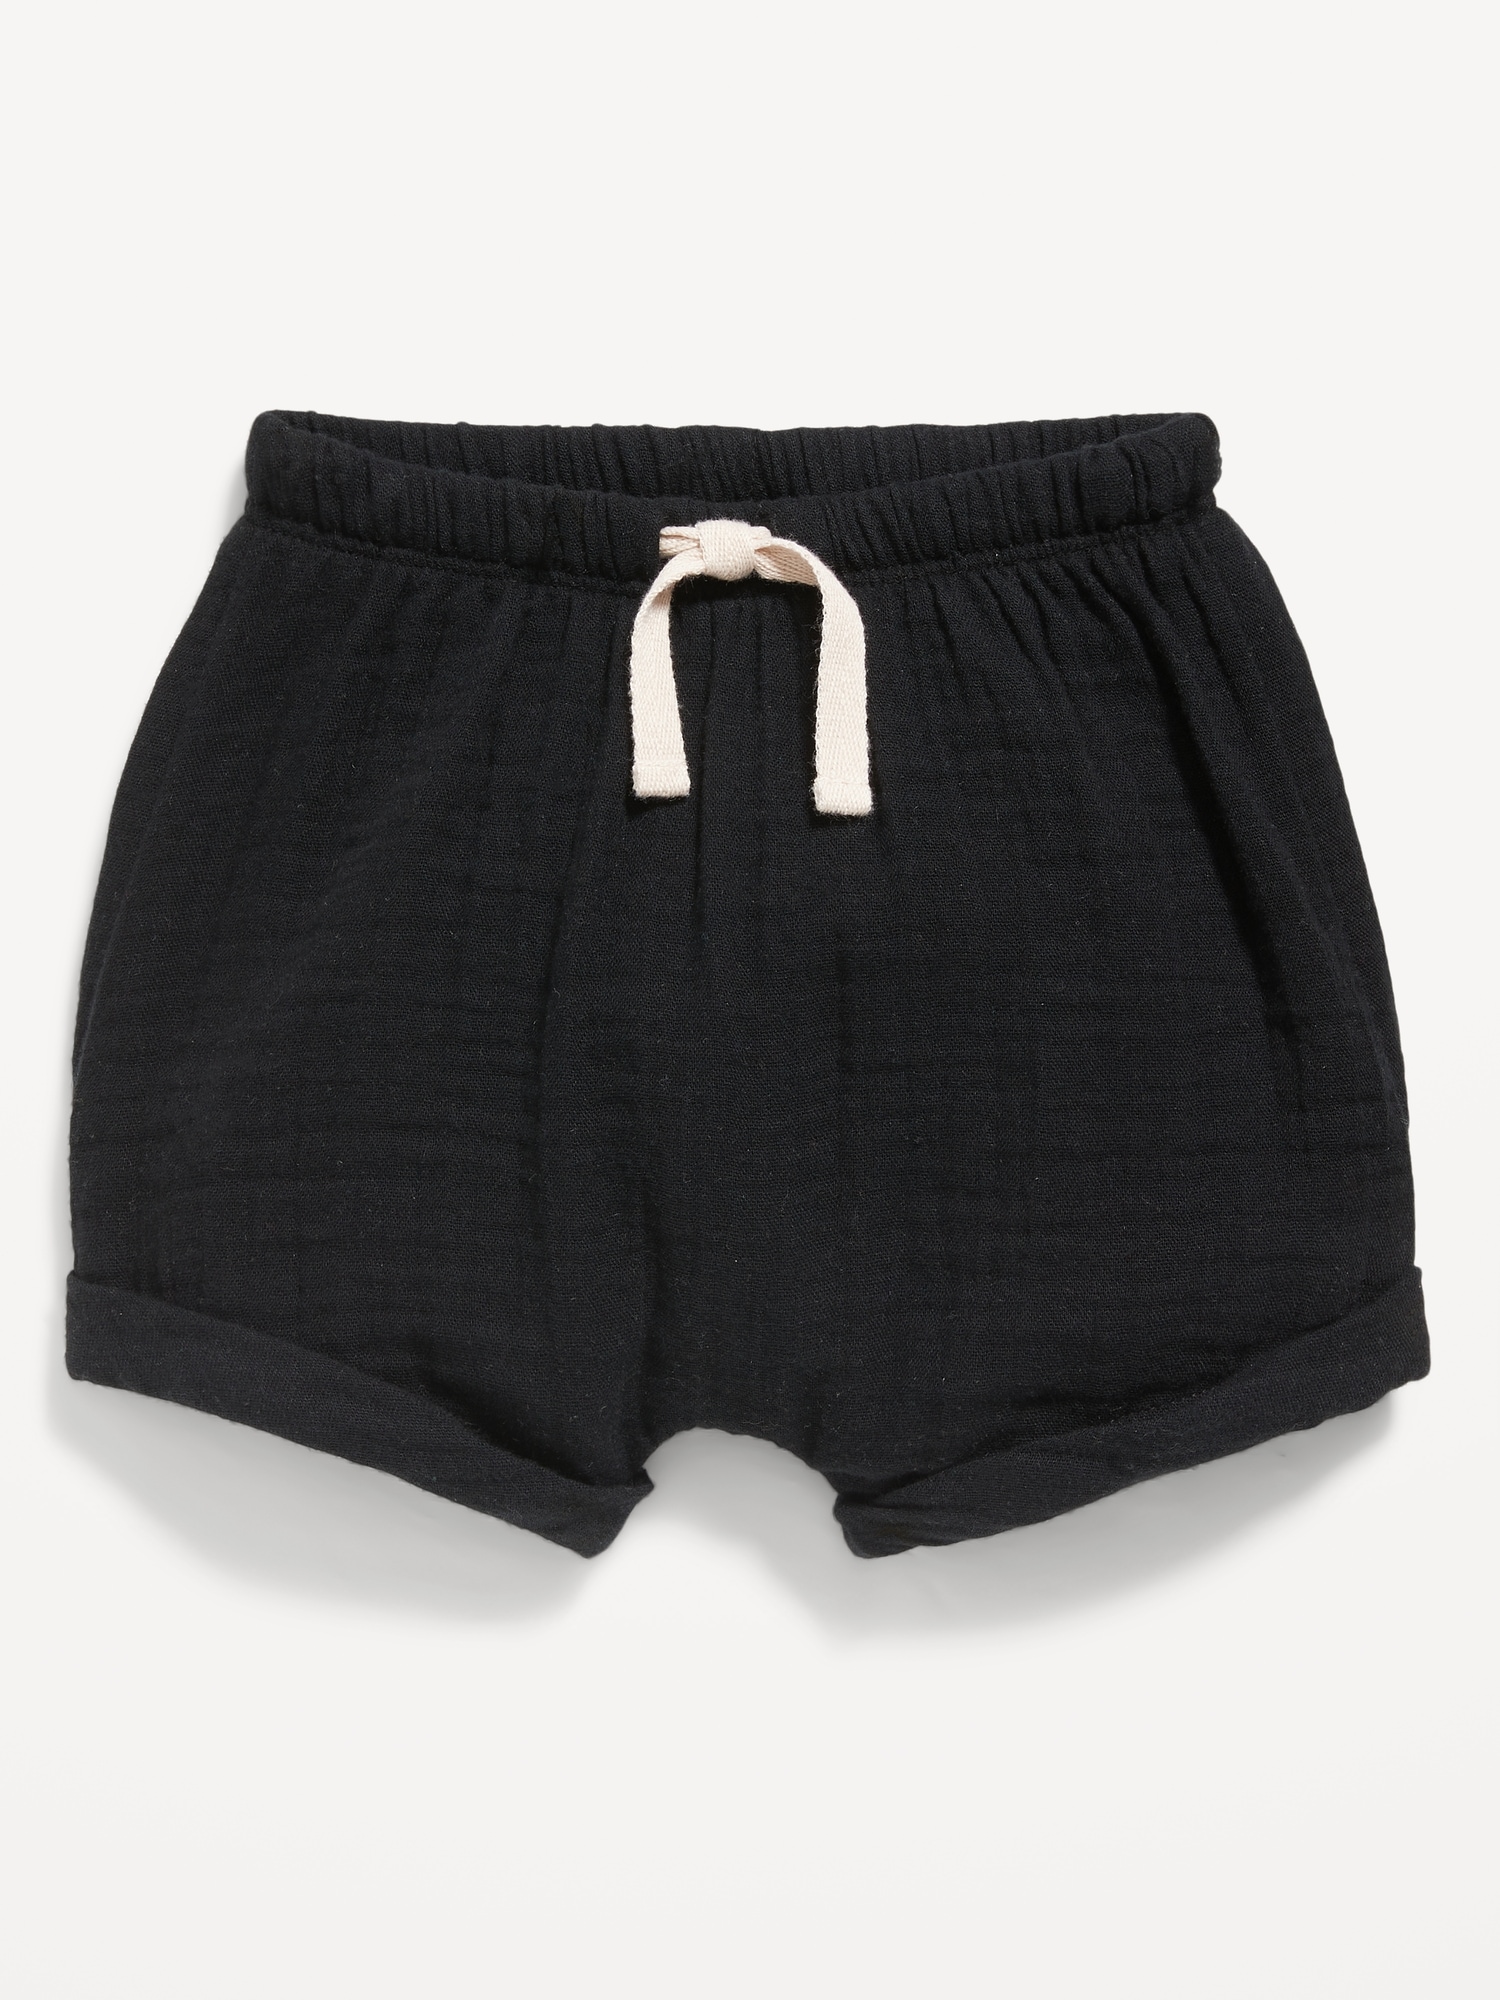 Old Navy Unisex Double-Weave Pull-On Shorts for Baby black. 1